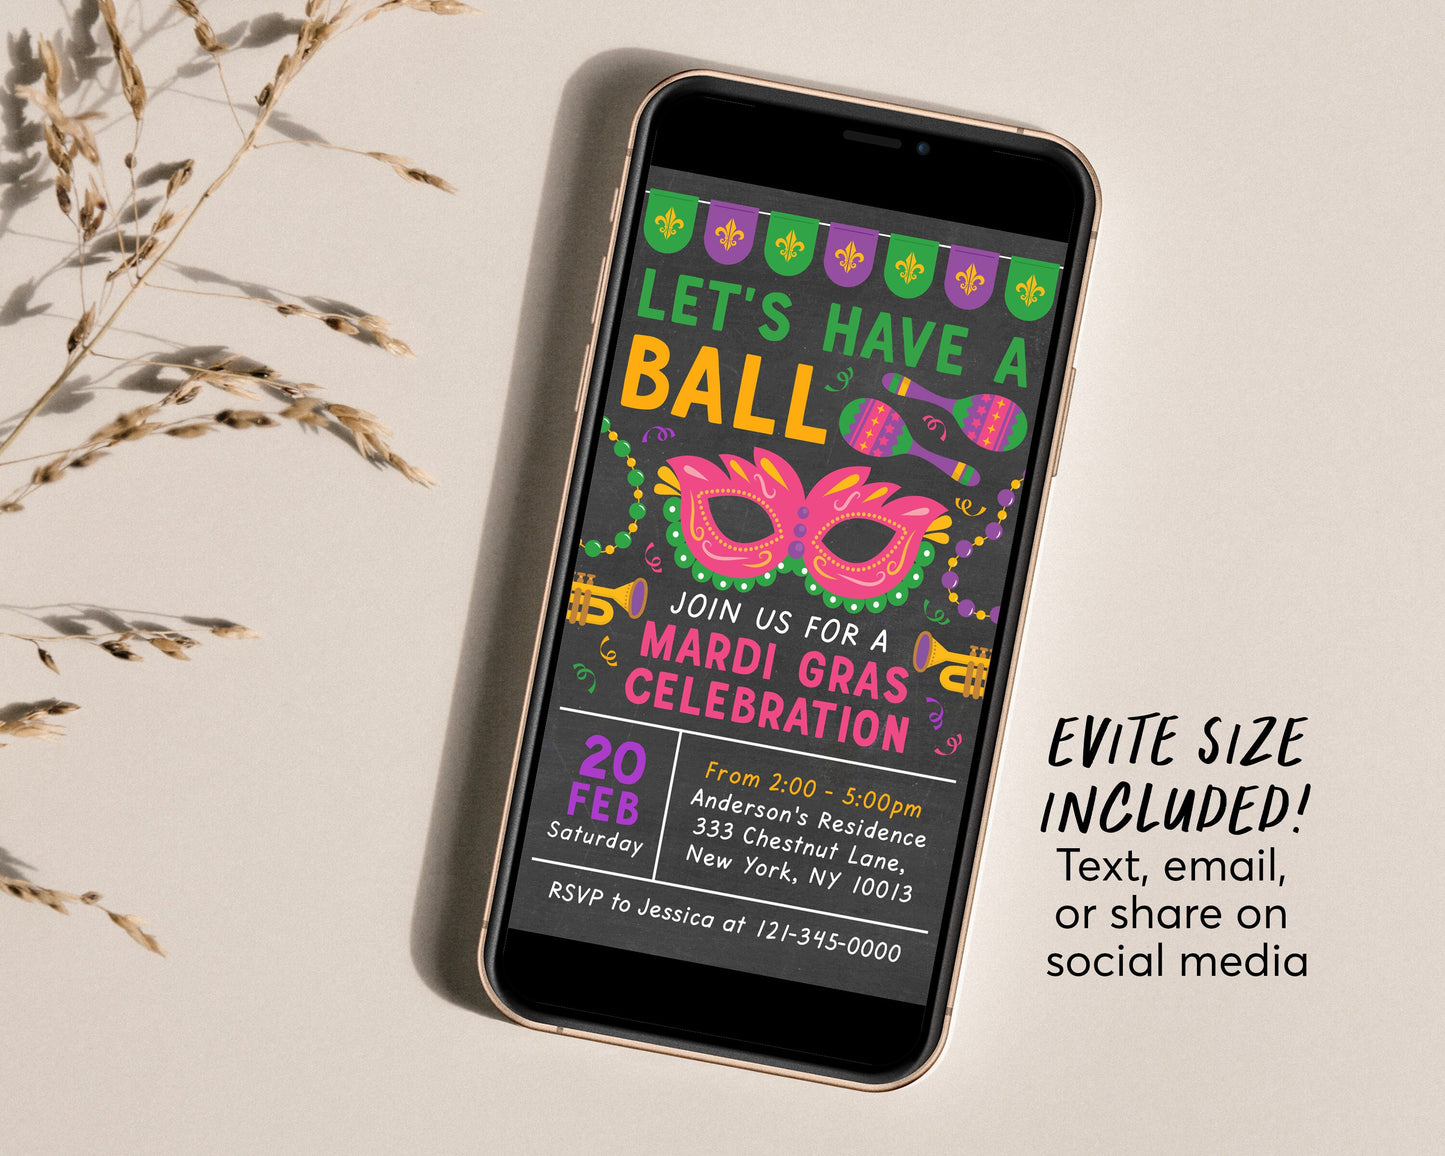 Mardi Gras Invitation Editable Template, Lets Have A Ball Invite, Fat Tuesday Party Printable, New Orleans Masquerade Party Carnival